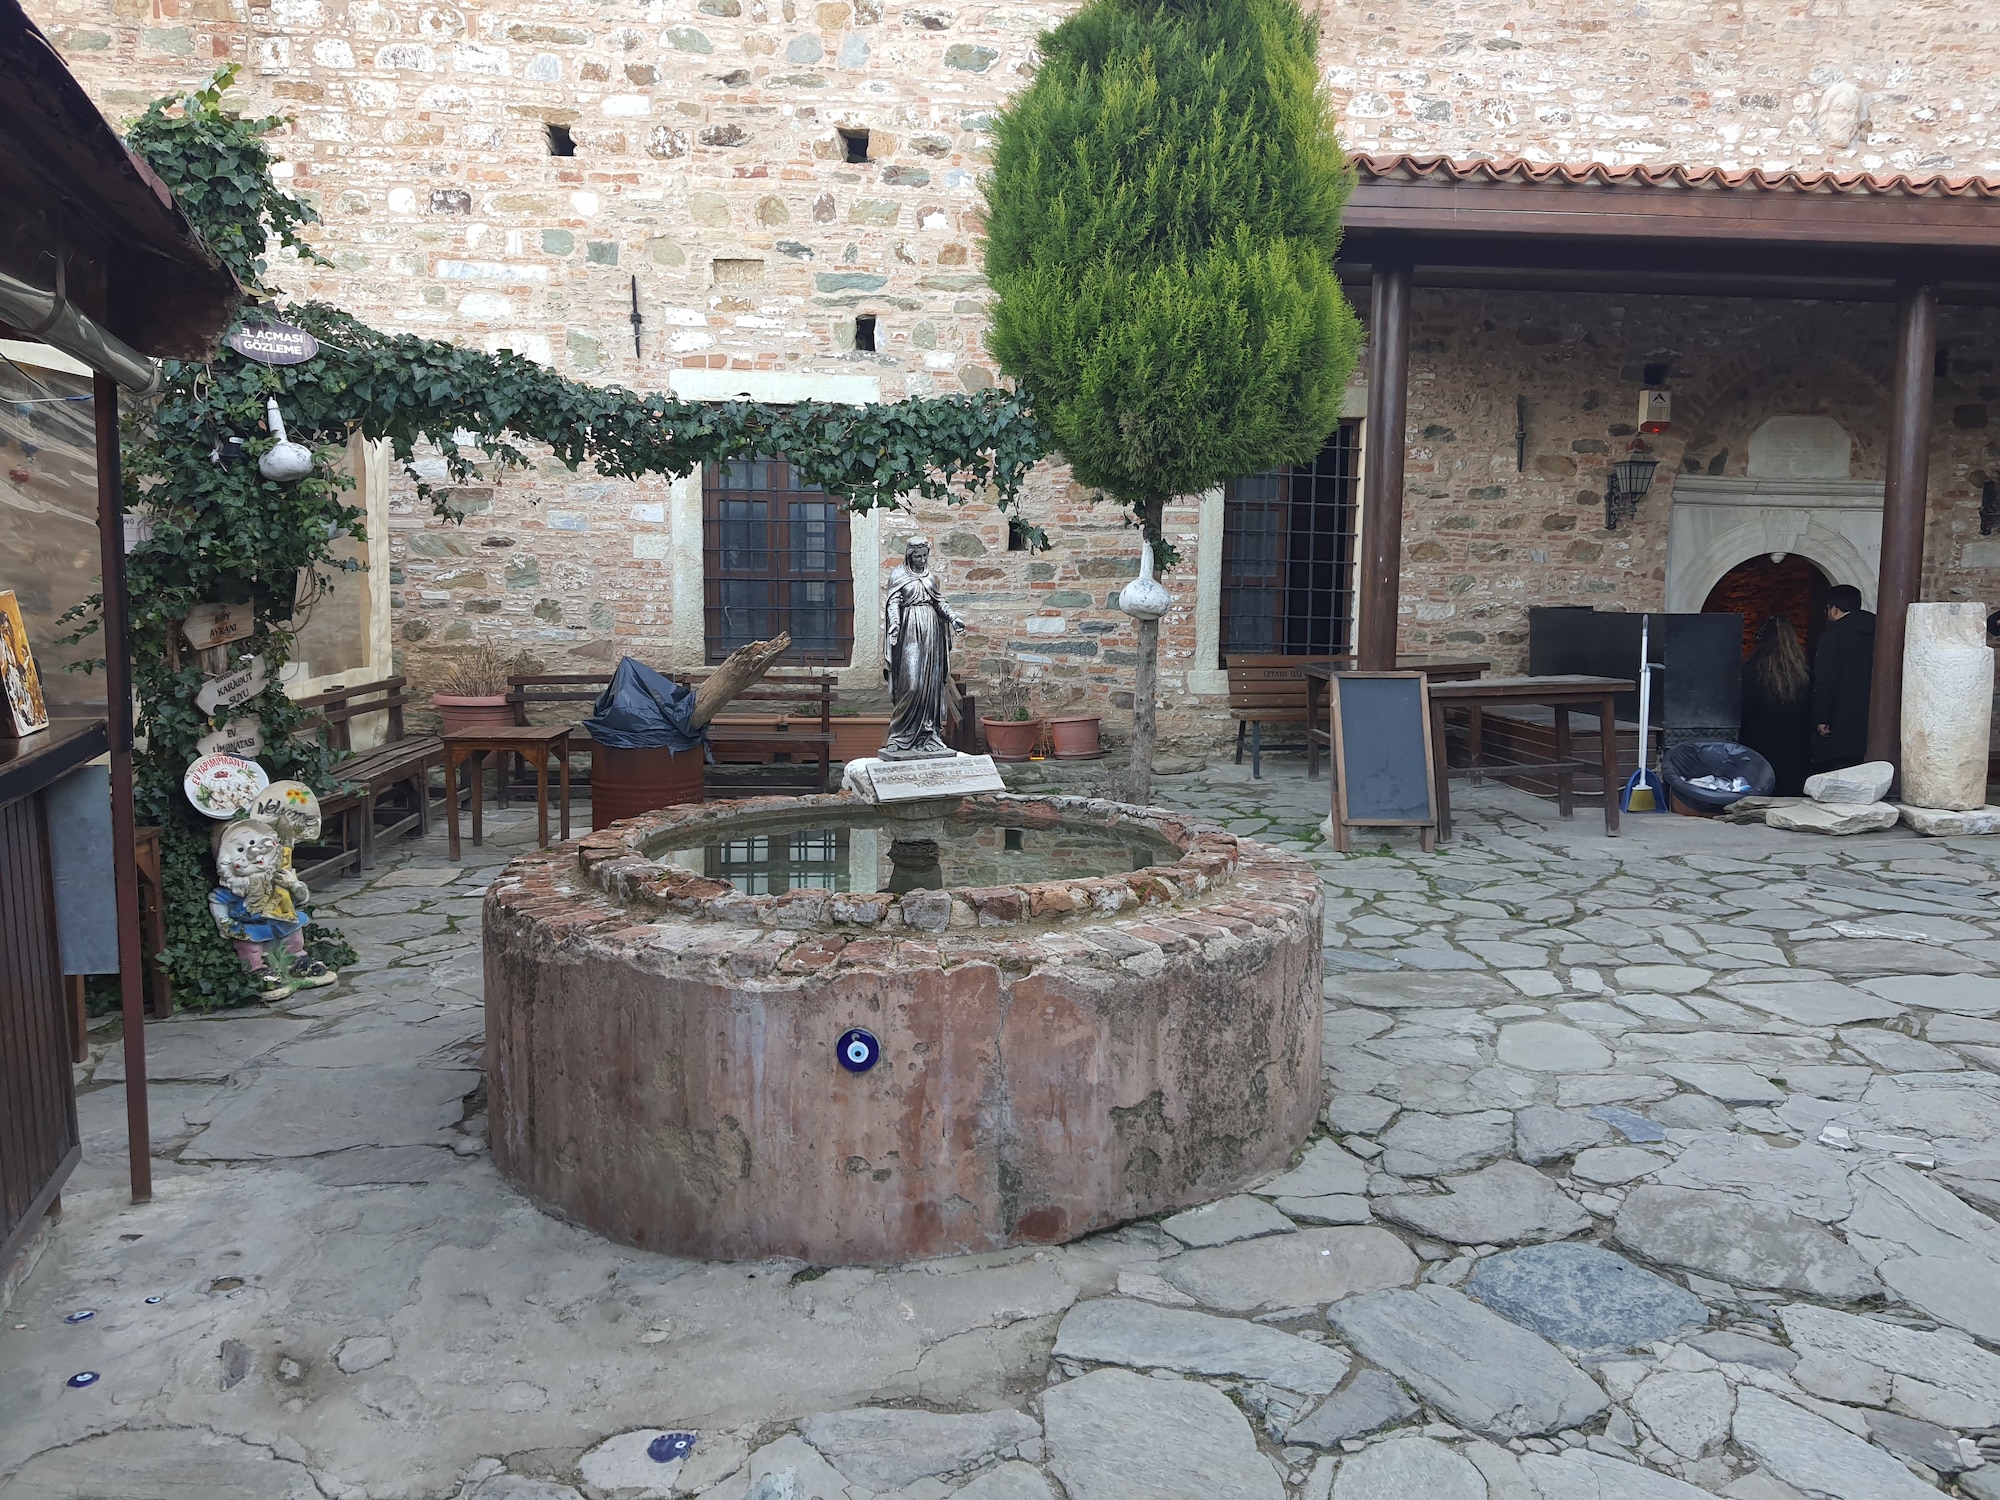 A view of a well in the courtyard of St. John, the Baptist Church, built on 
a terrace in the west of the village, in Şirince Feb. 19, 2022. Tourists 
indulge in some of the best wines of western Türkiye when they visit 
Şirince, have lunch at one of the bed-and-breakfast type eateries, stop 
by the Christian church where St. John gave sermons and make a wish 
at the well. (U.S. Air Force photo by Tanju Varlıklı)